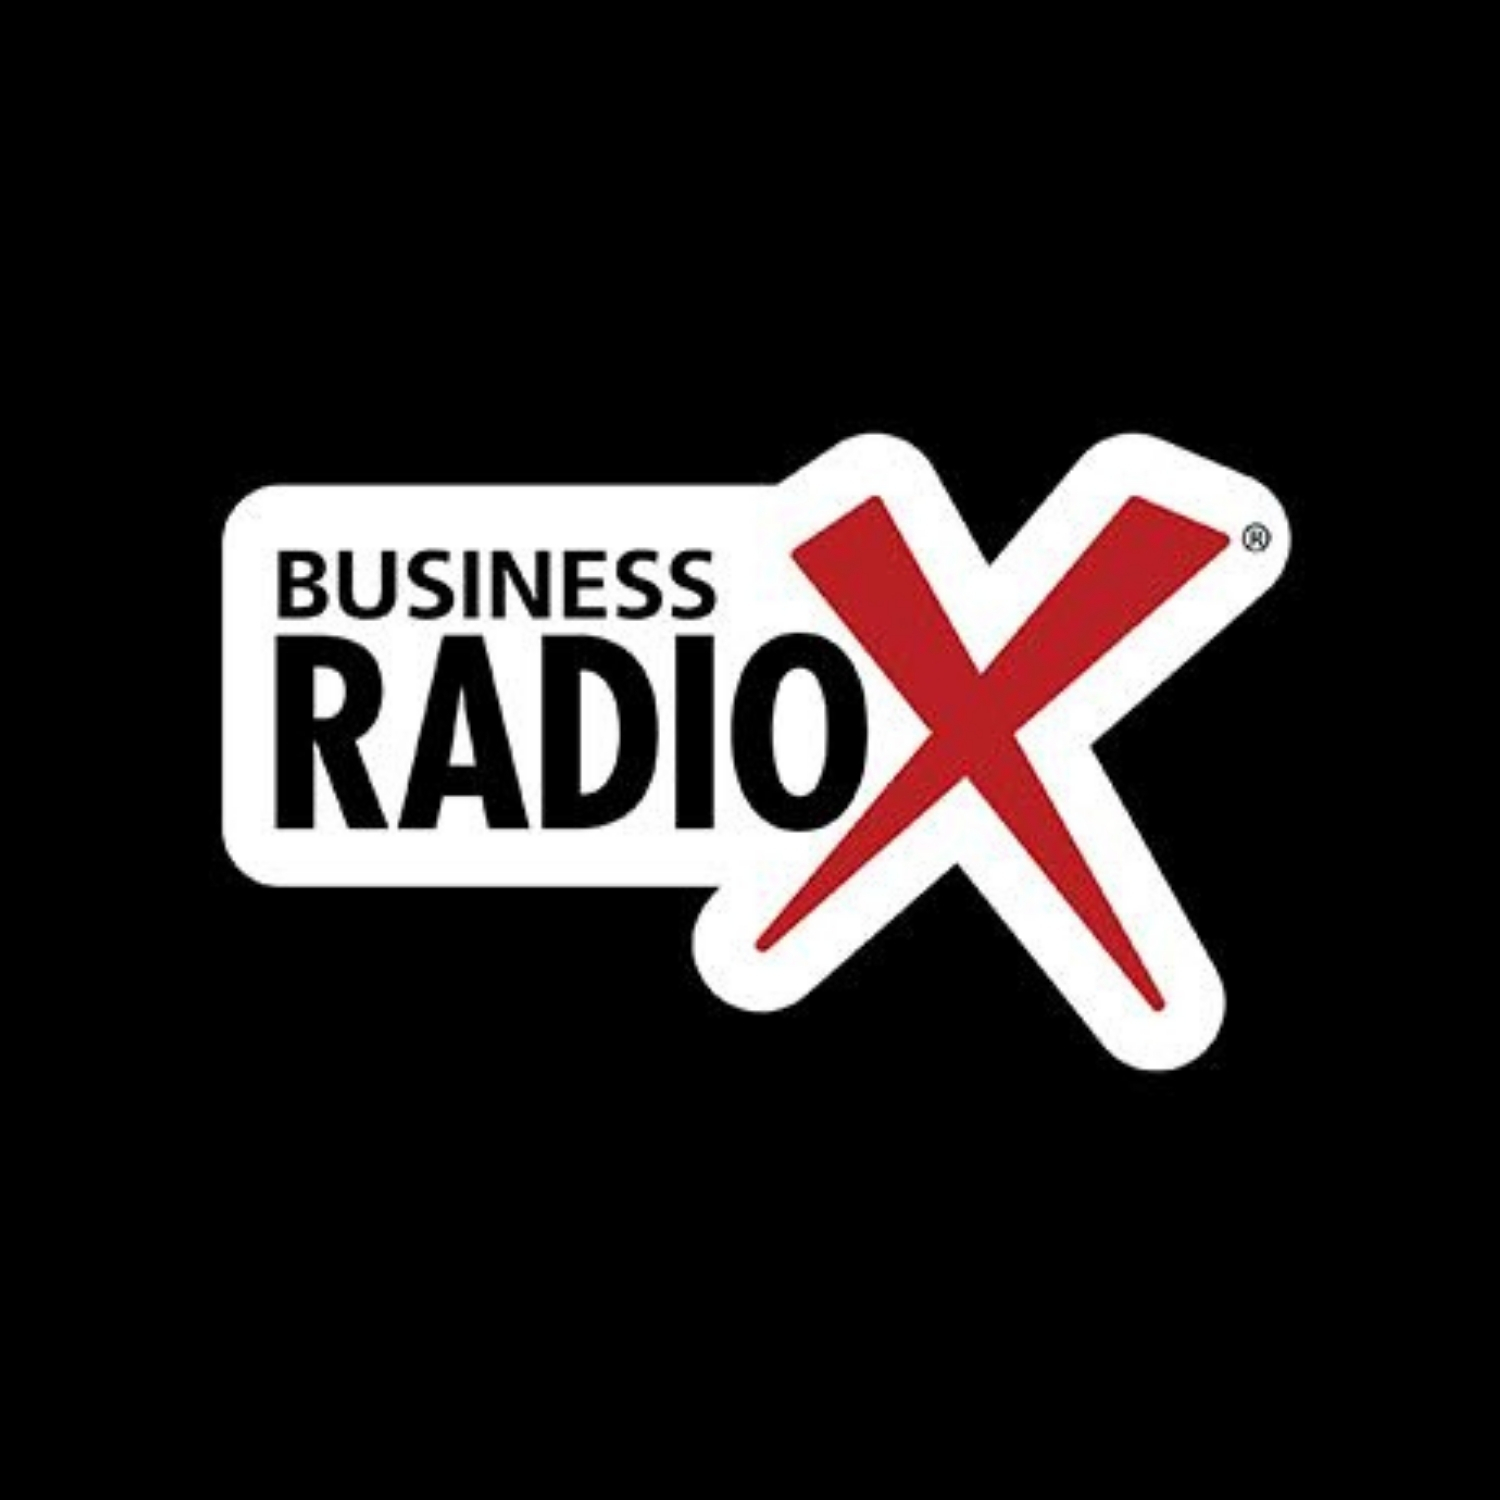 James Cathy and Brent Fielder: Chick-fil-A Family Members to Appear on Family Business Radio